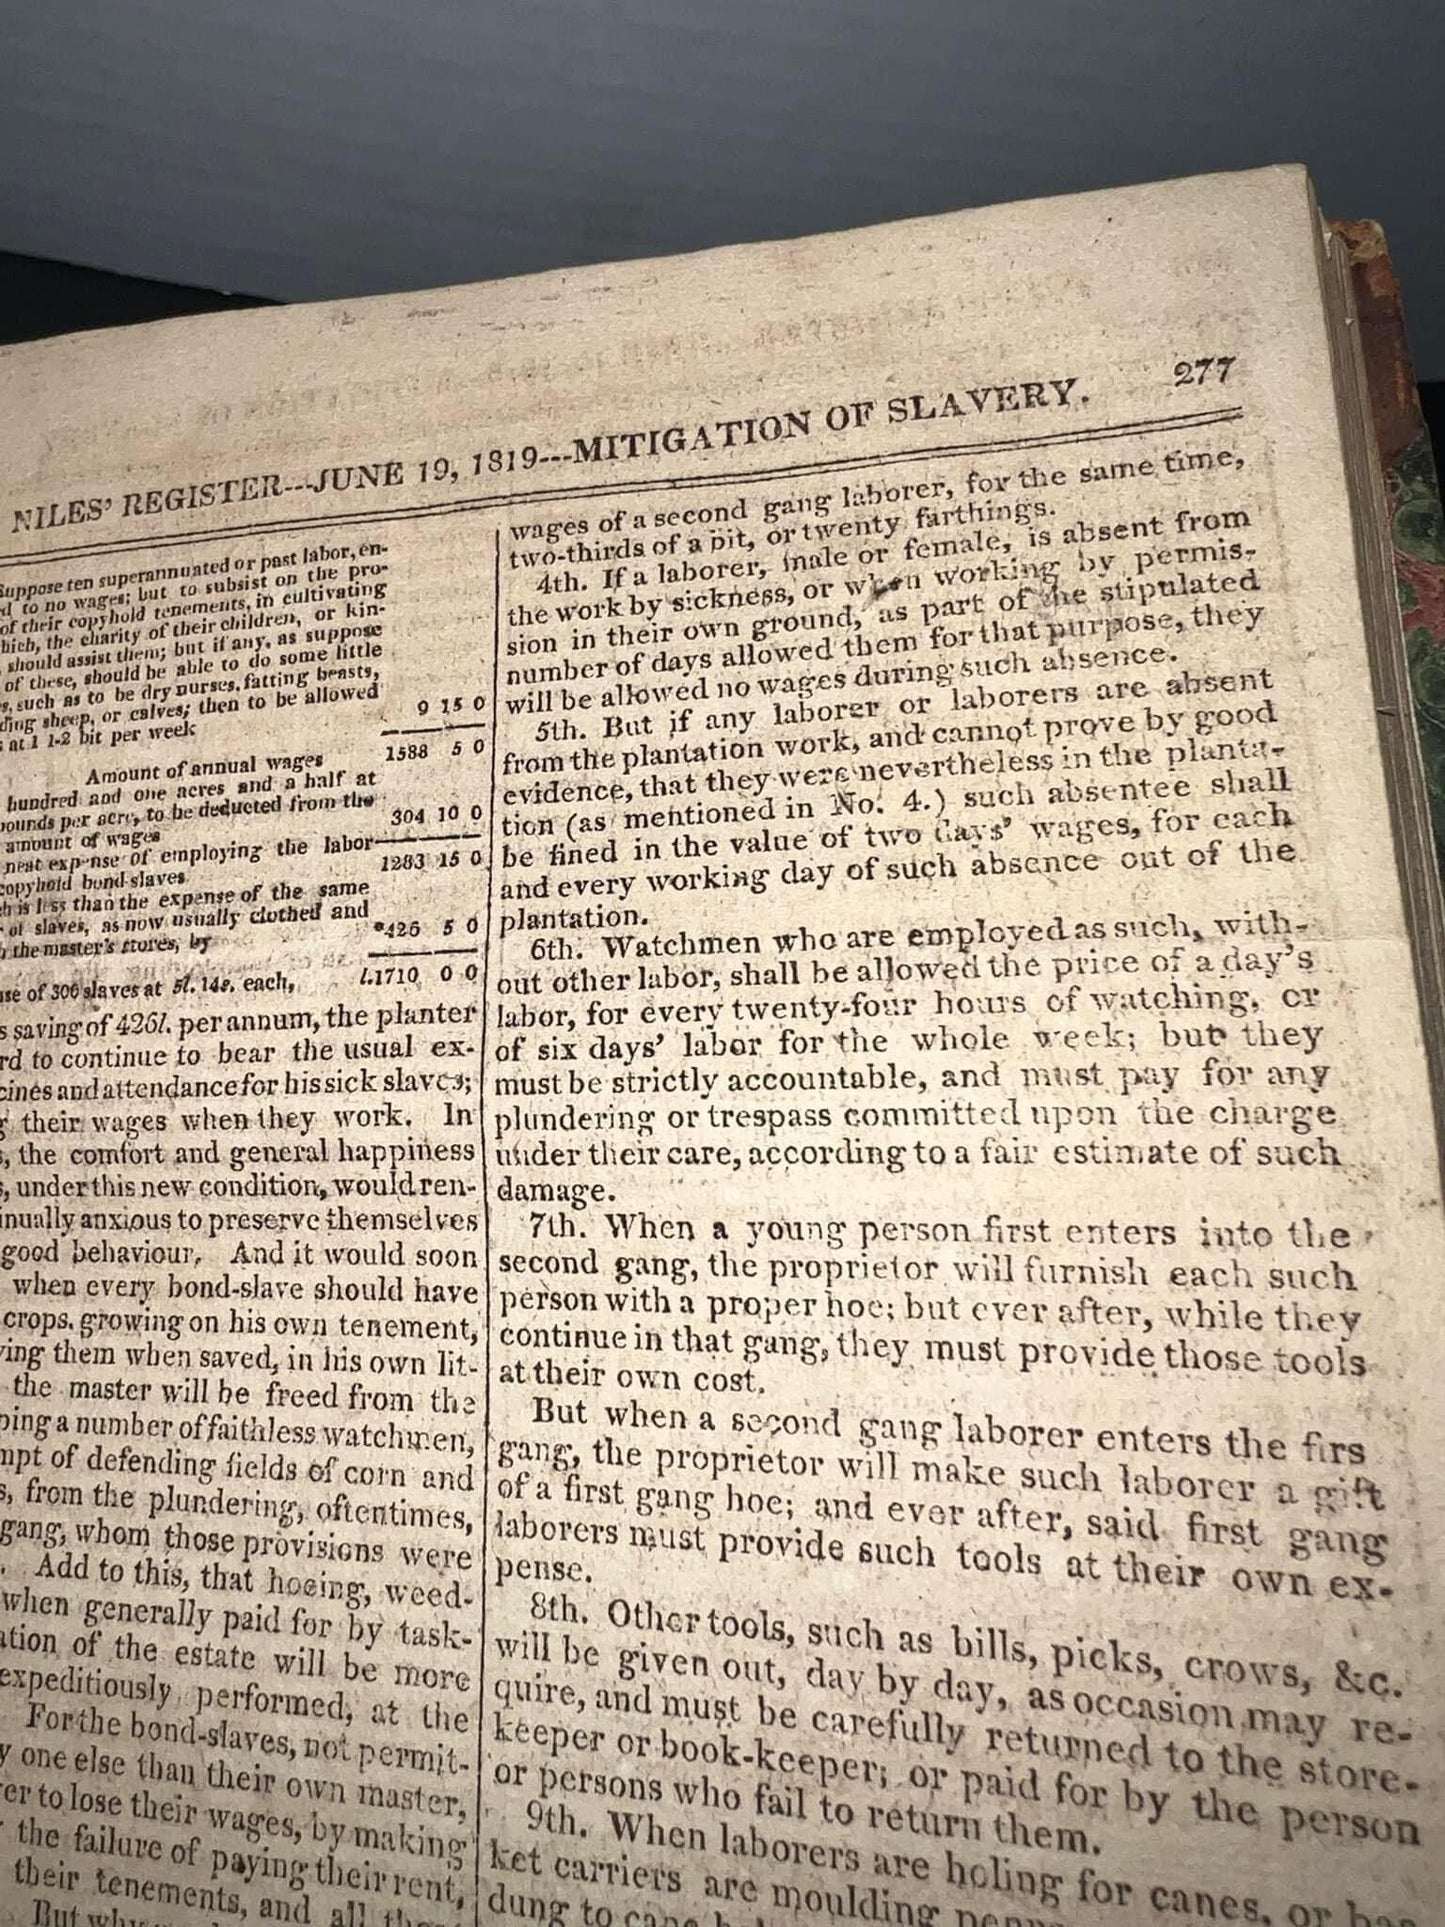 Antique pre civil war 1819 Nile’s weekly register - March to September slavery native Americans early Americana history